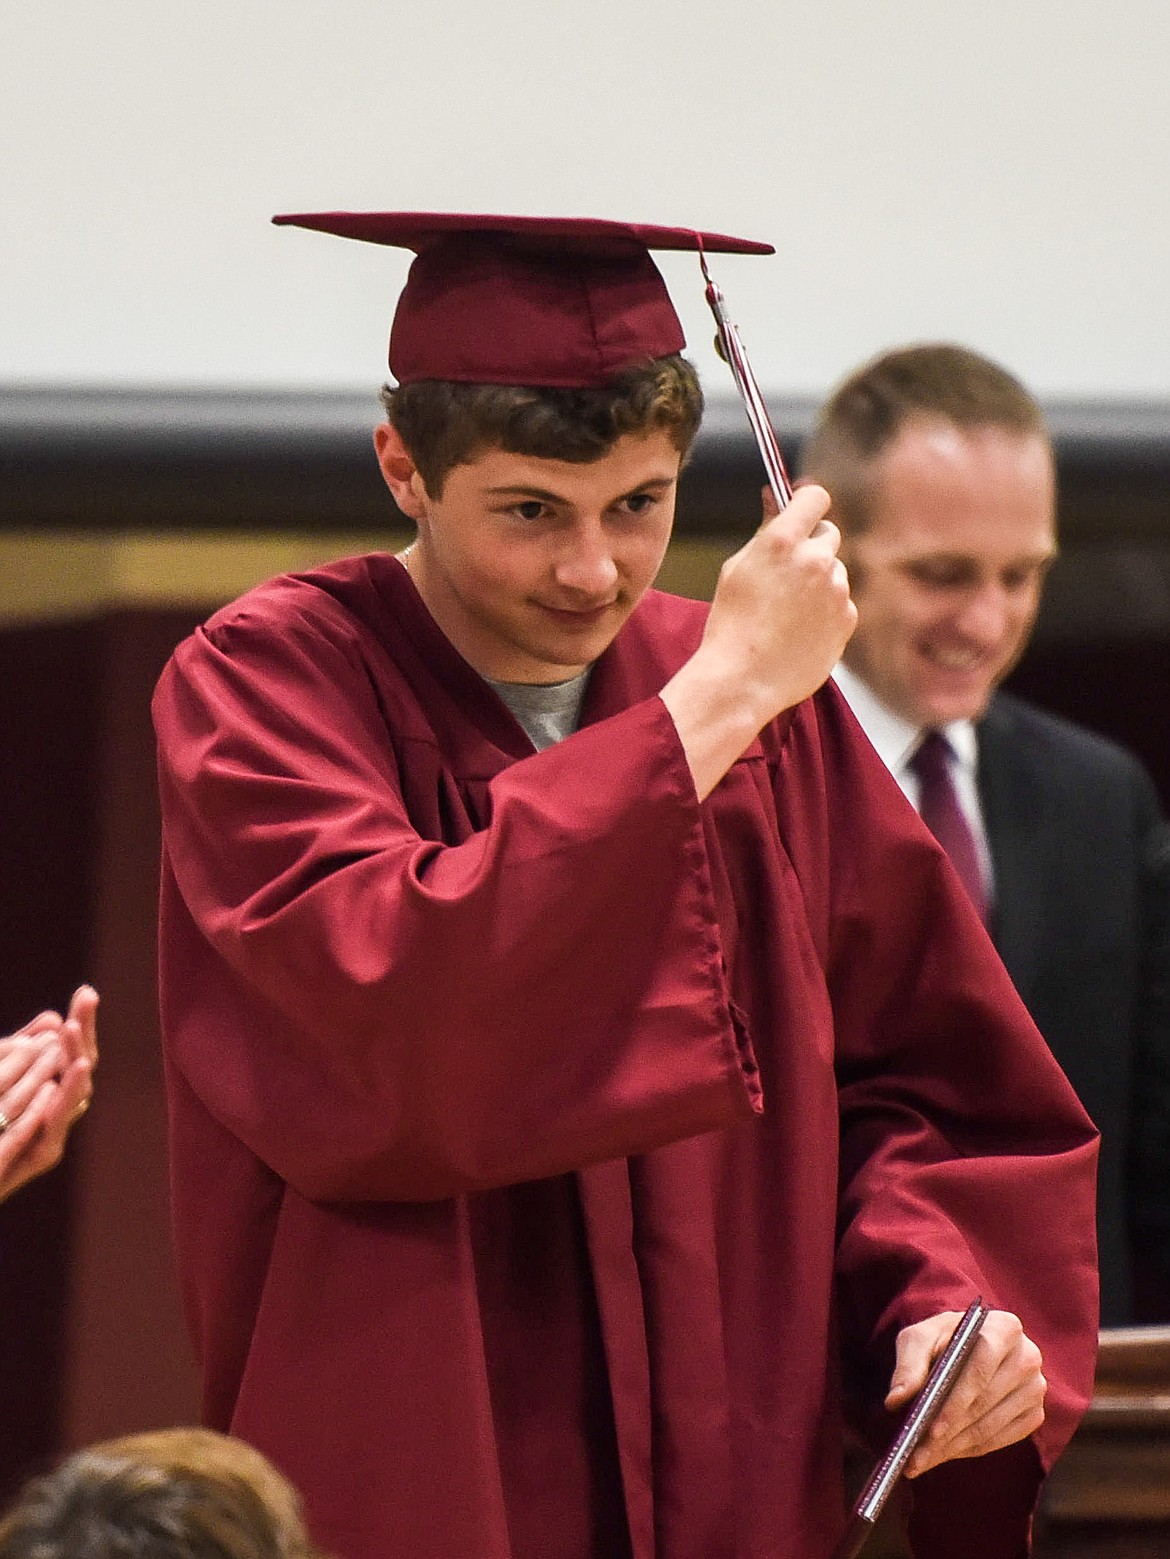 Hunter Leighty moves his tassel after receiving his diploma, Saturday at the Troy High School graduation at the Troy Activity Center. (Ben Kibbey/The Western News)